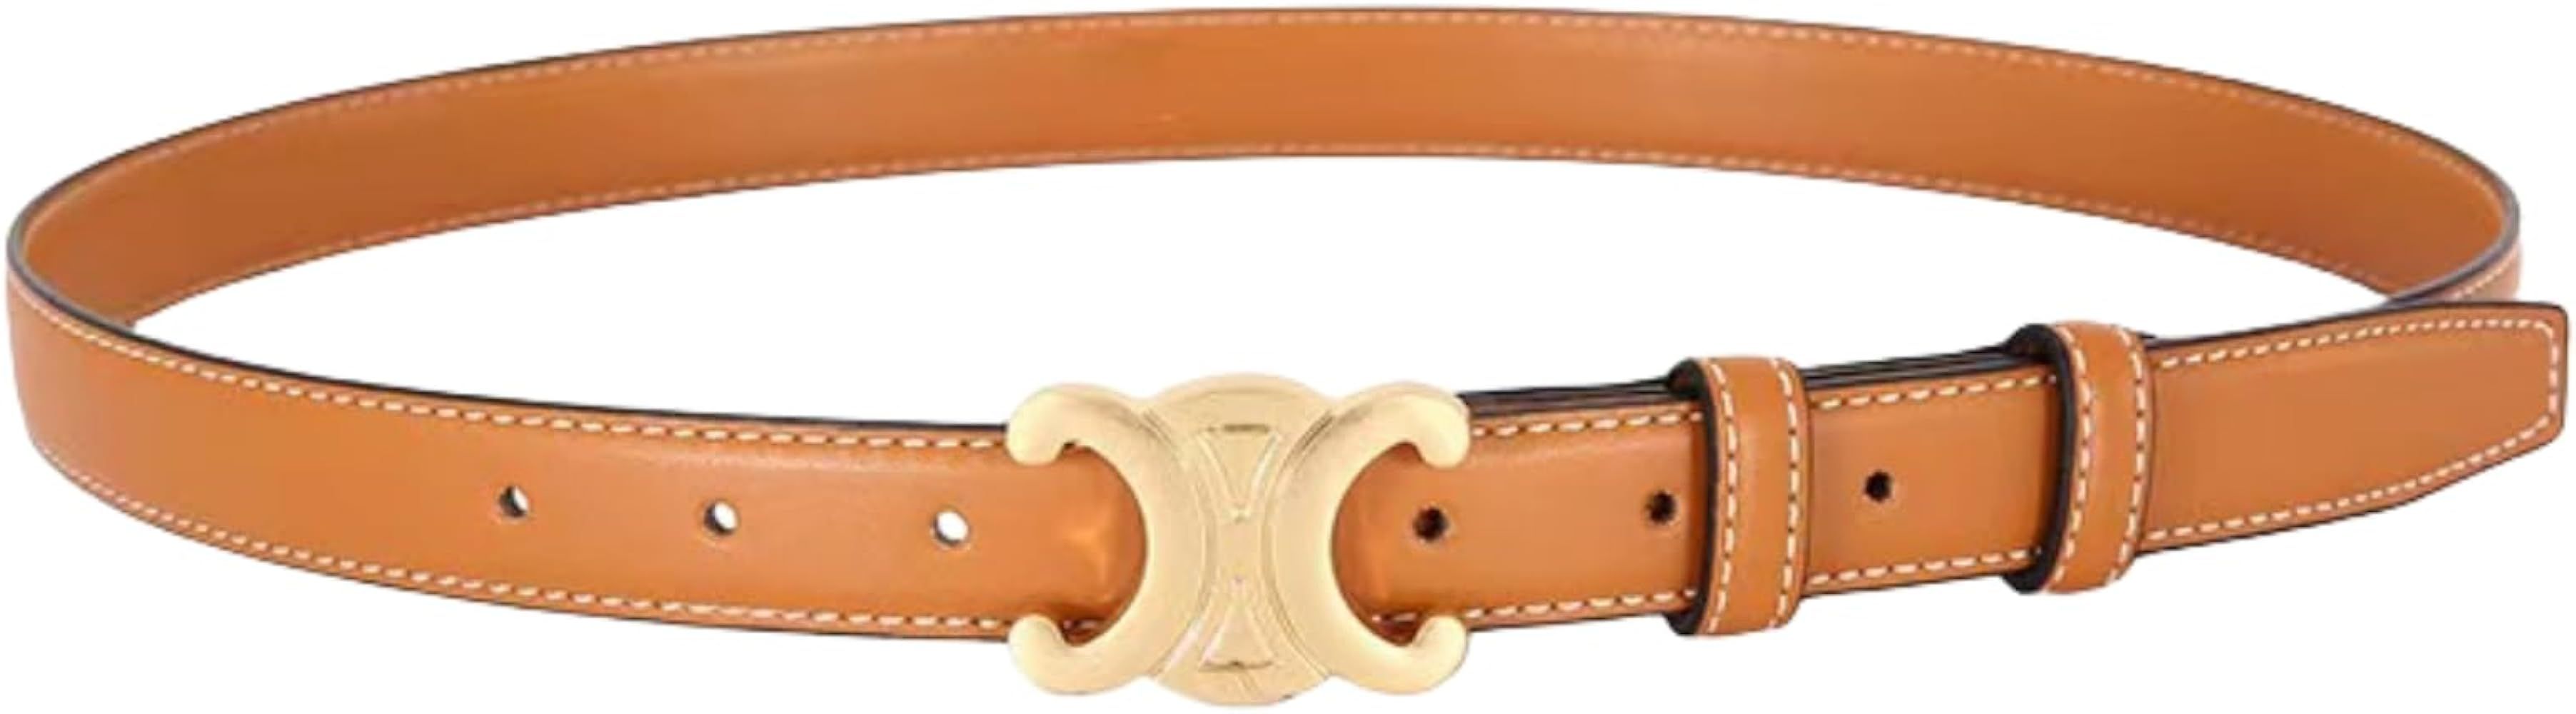 Womens Leather Belt With Gold Color Buckle, Soft Leather Waist Belt with Pin Buckle for Jeans Pan... | Amazon (US)